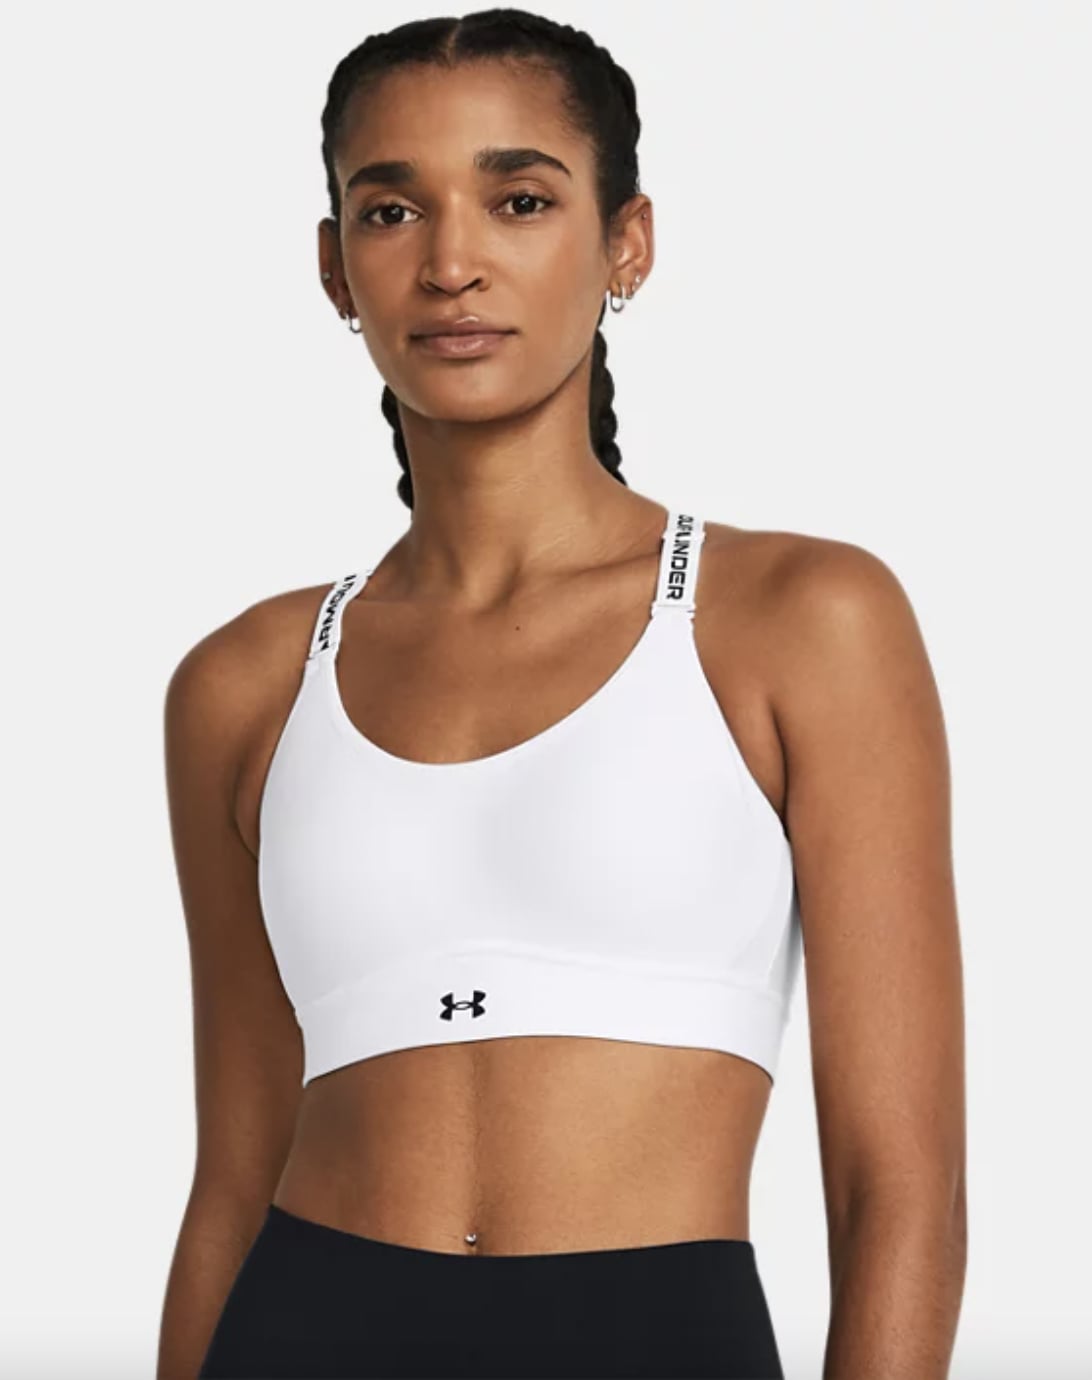 XL Sports - The sports bra that stands out from all the others. The Pace  sports bra from New Balance offers support, comfort and style in one great  package. Krazy Sale is